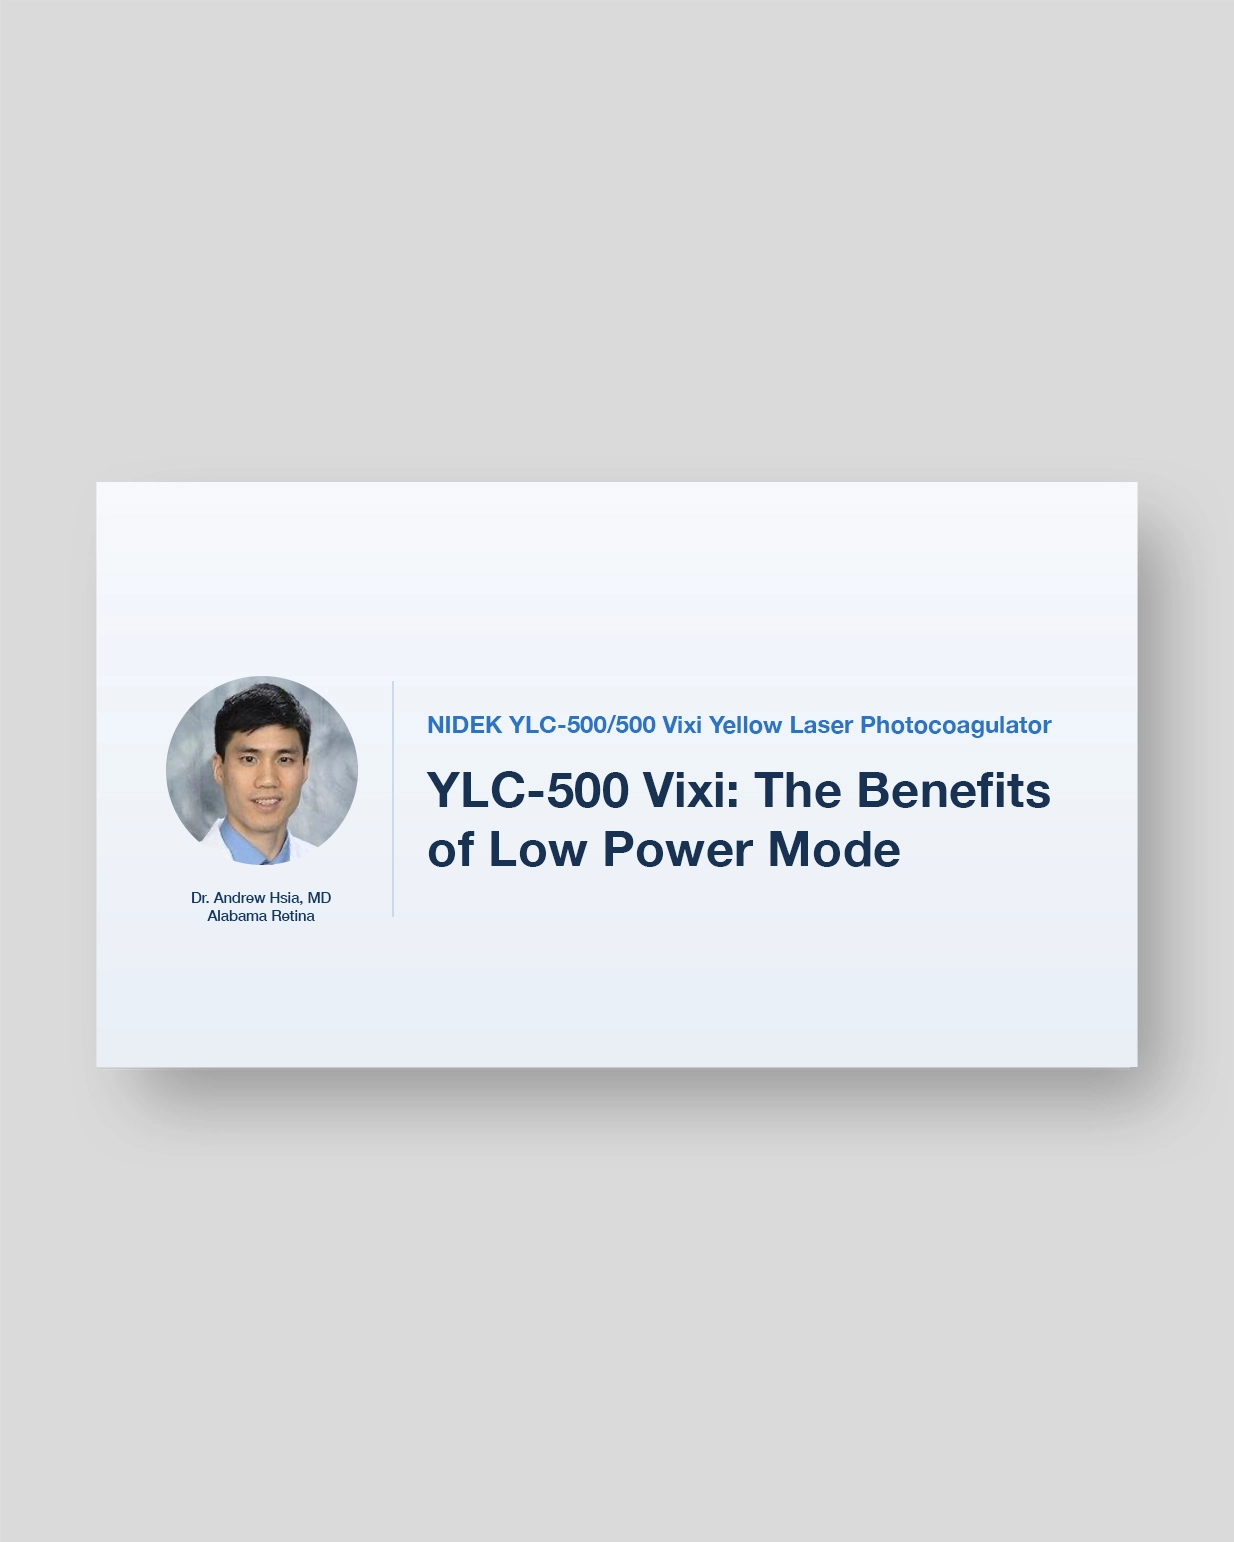 YLC-500: Vixi: The Benefits of Low Power Mode